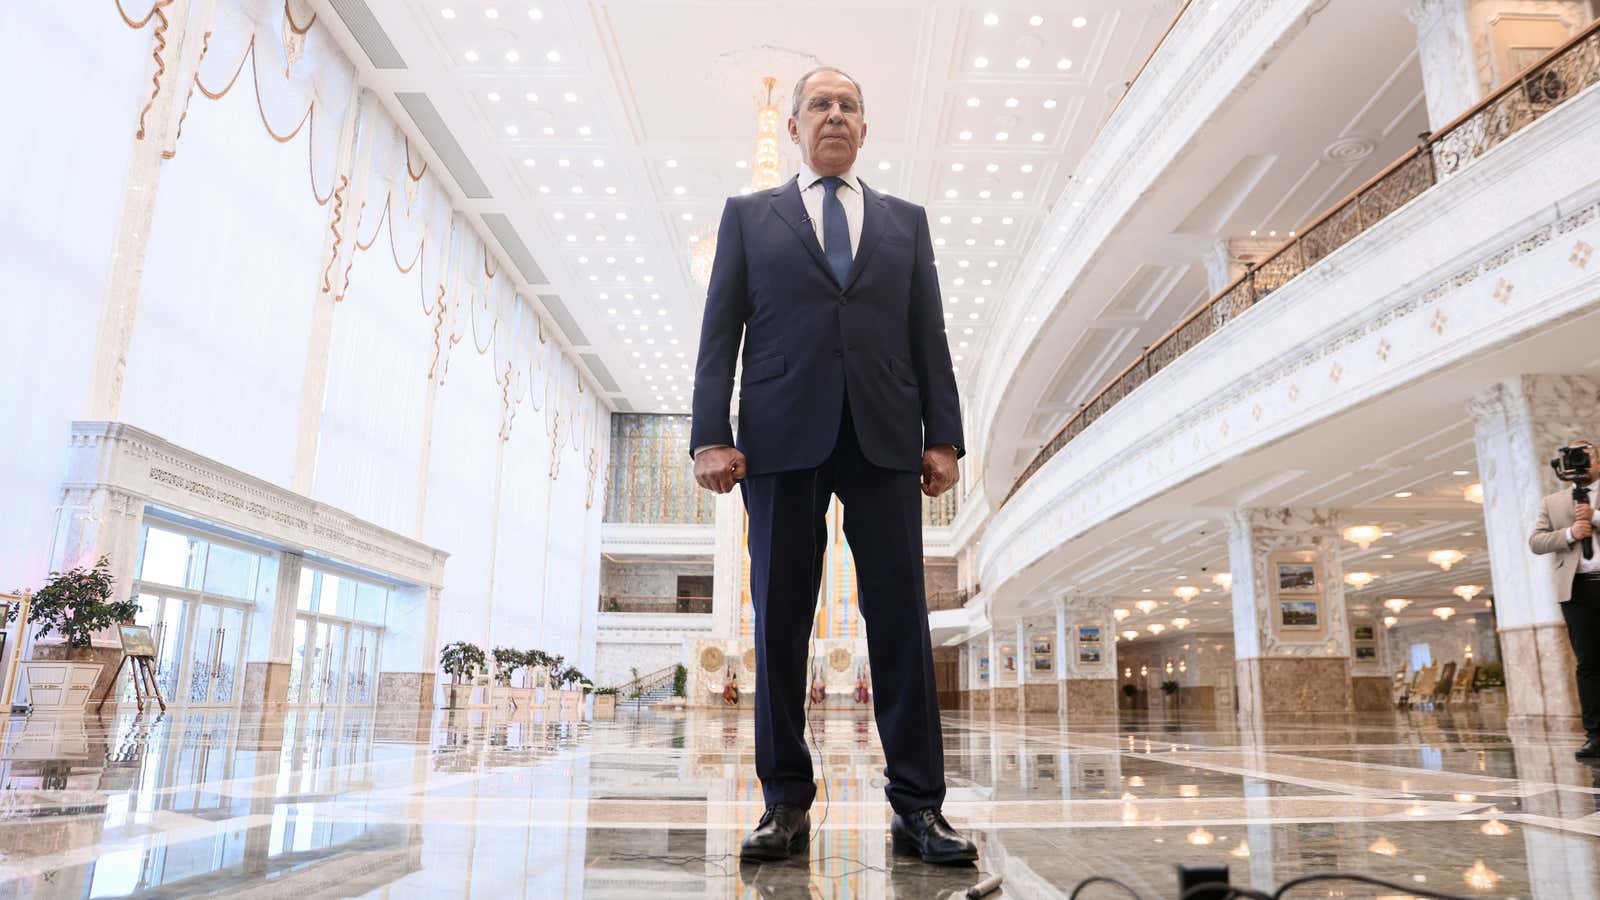 Russian Foreign Minister Sergey Lavrov speaks to the media during his visit to Minsk.